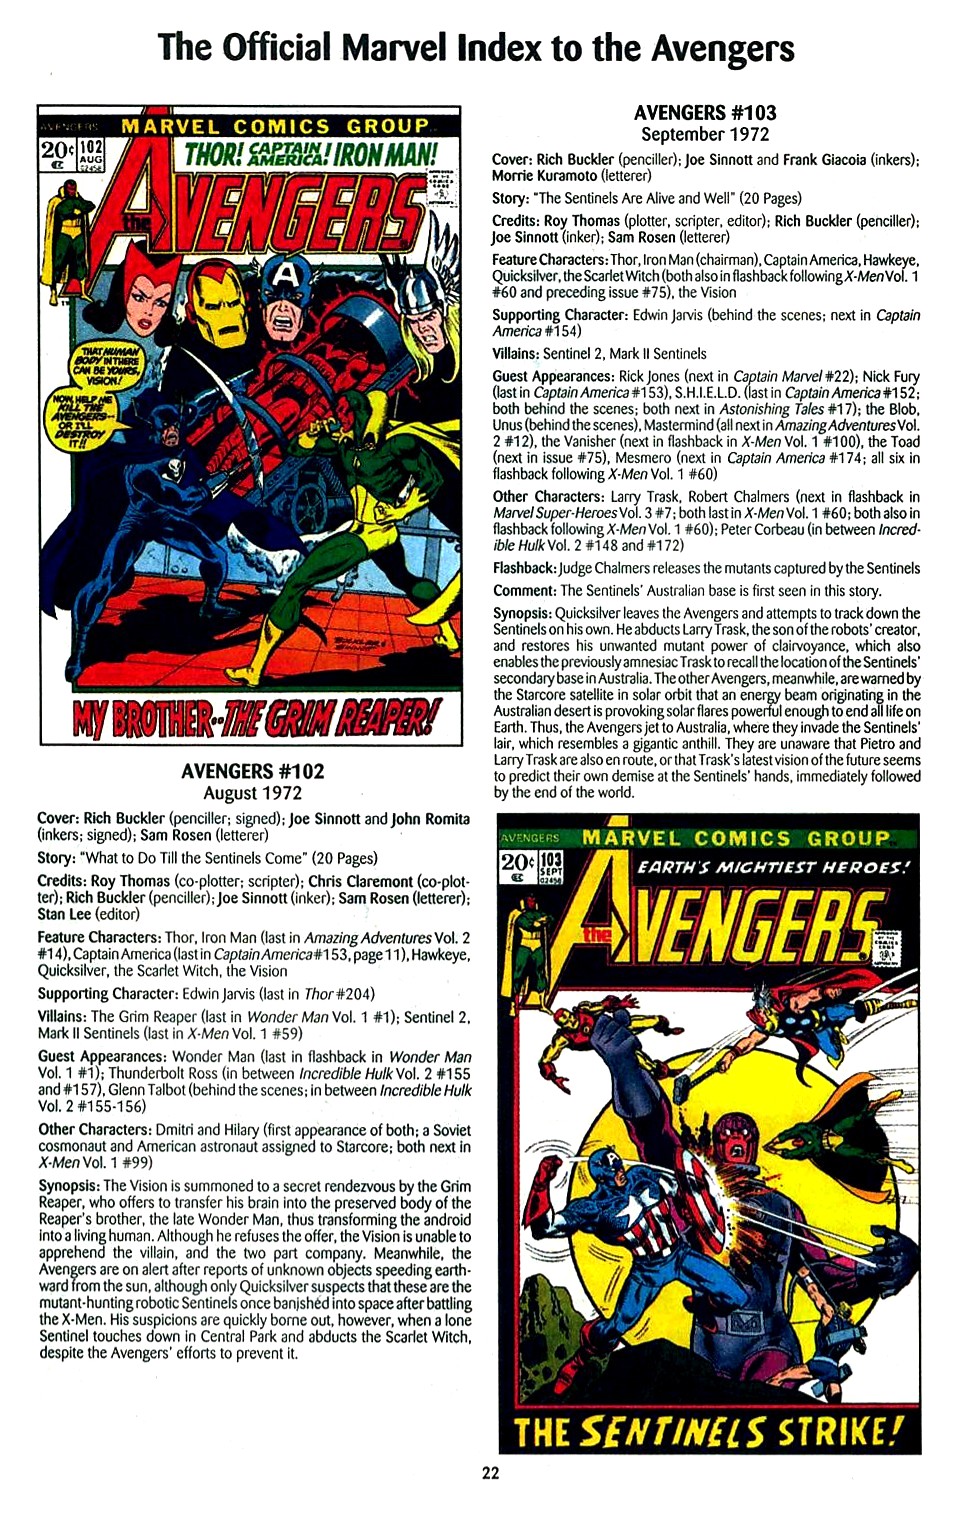 Read online The Official Marvel Index to the Avengers comic -  Issue #2 - 24